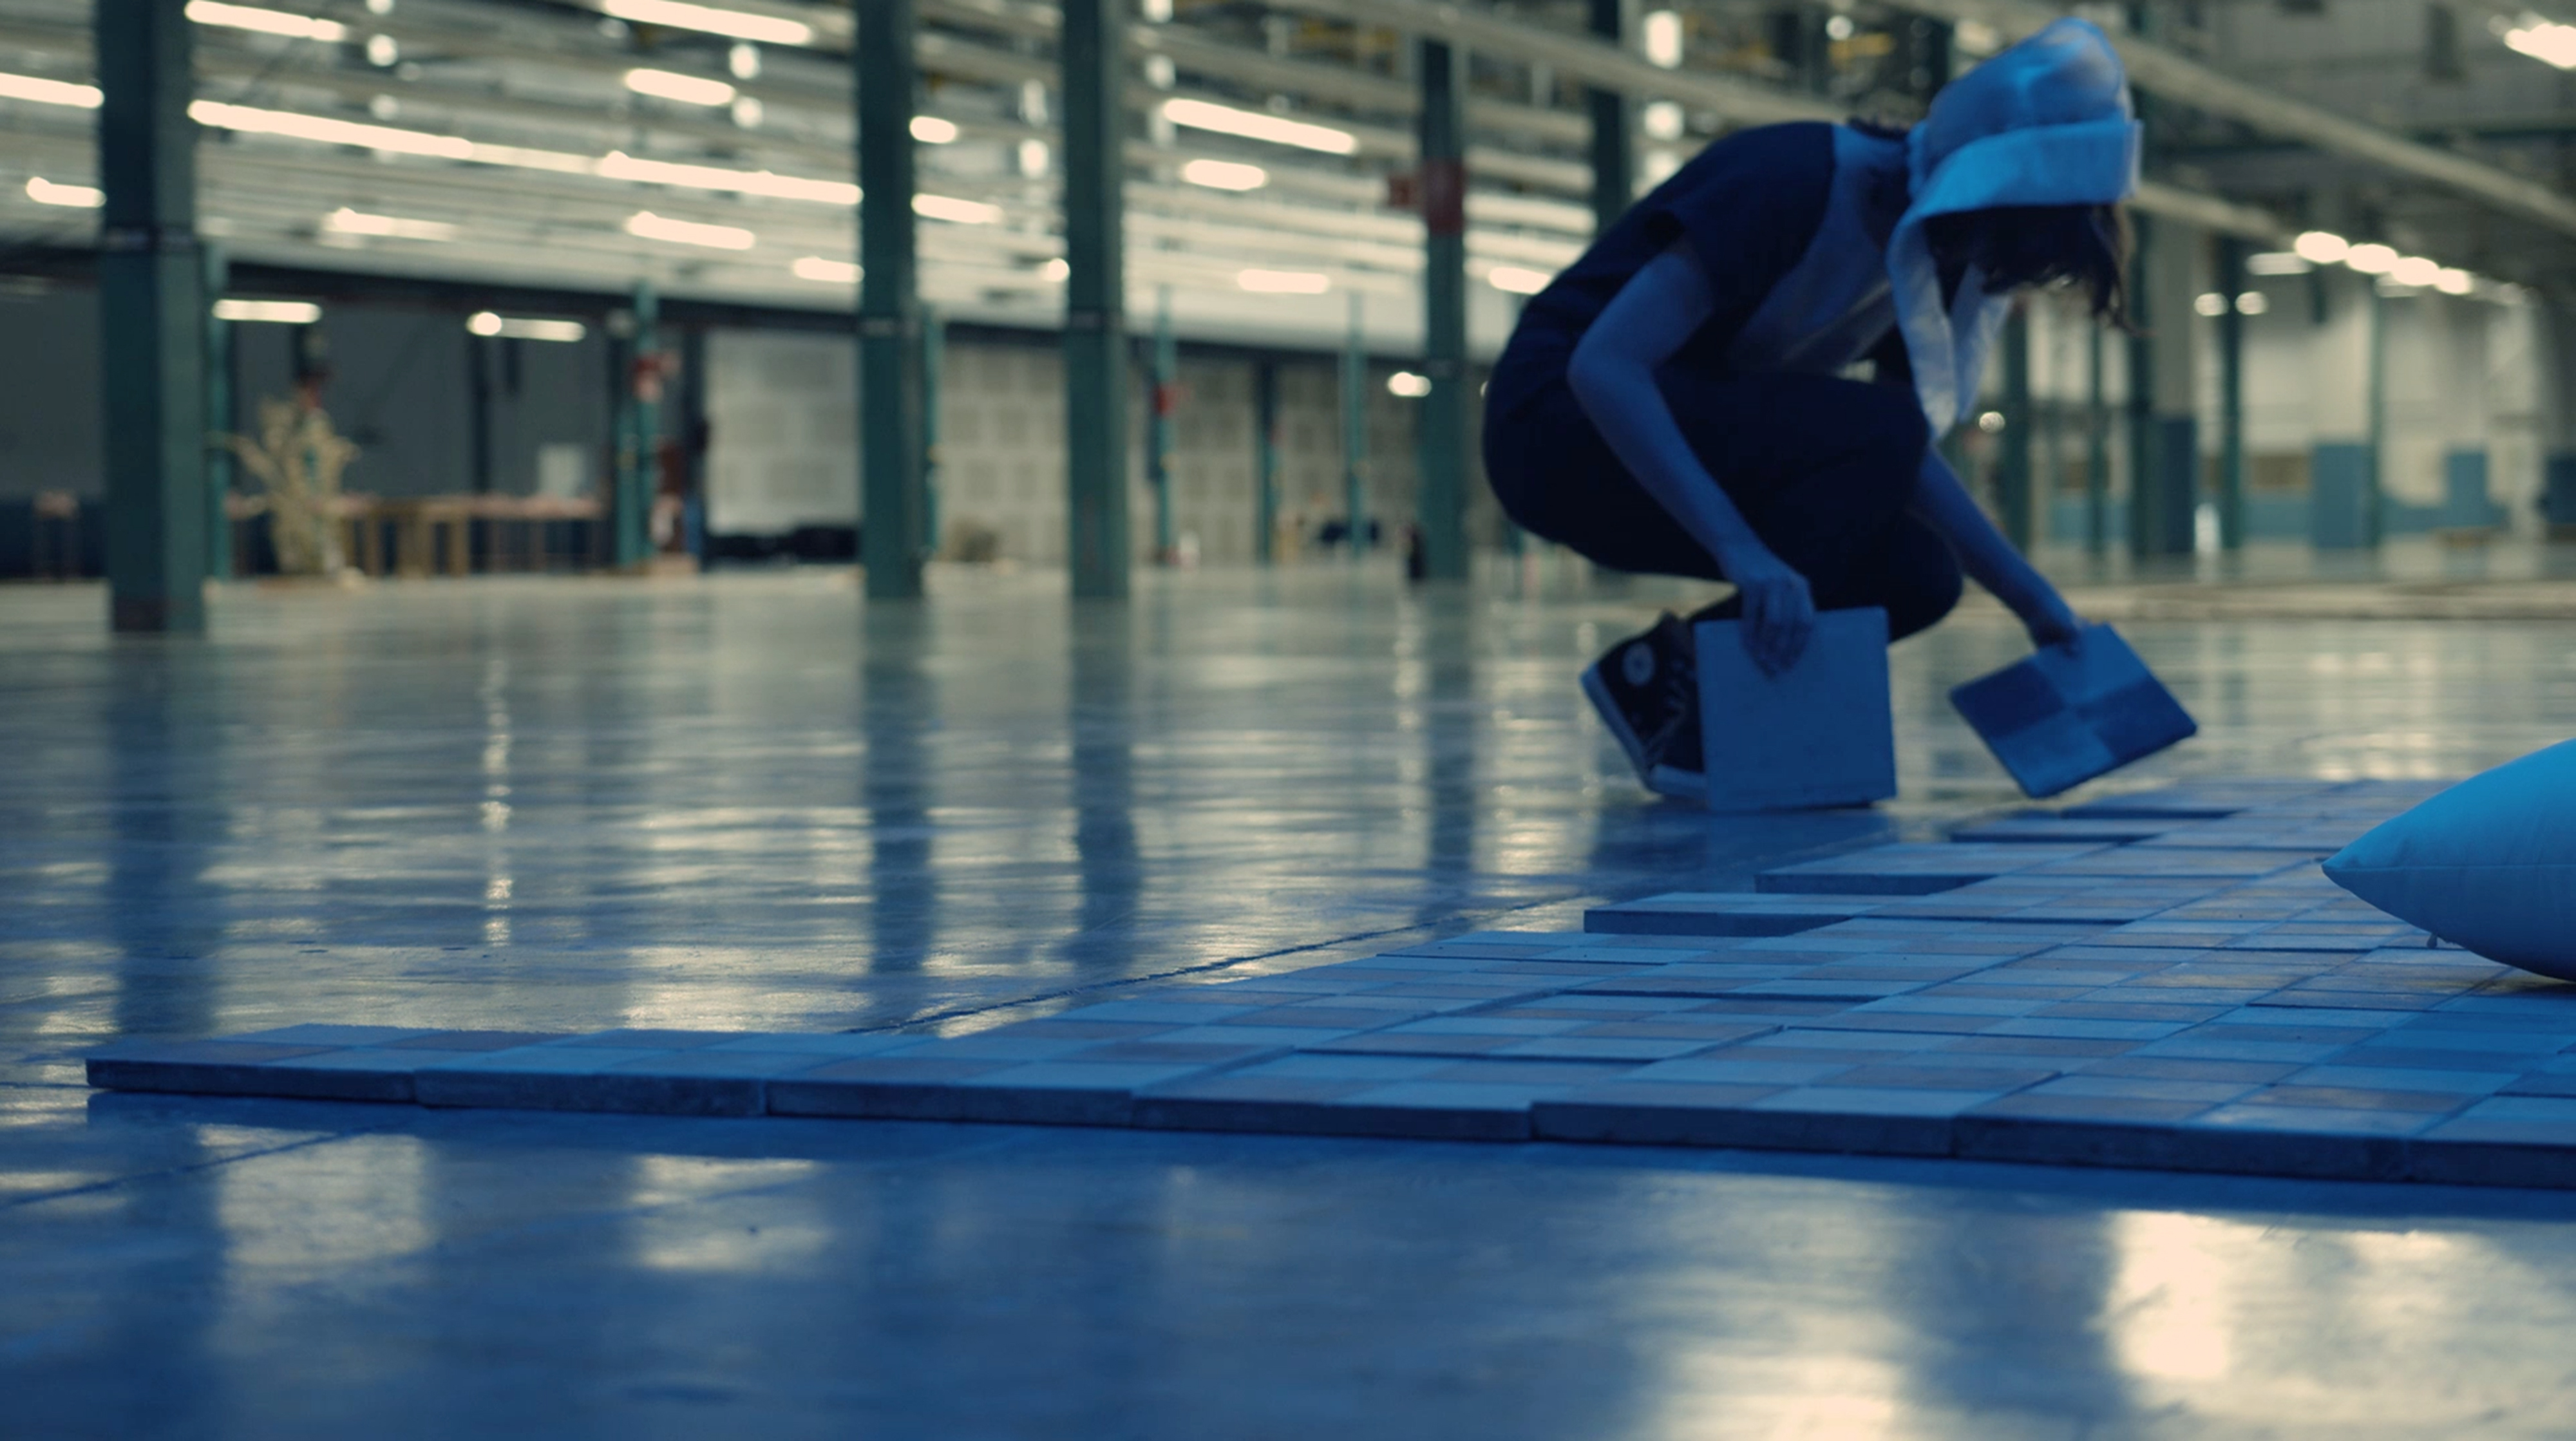 A person with a white head covering is leaned over tiles on the floor. Blue light floods in. The background looks like a warehouse with tall pillars.